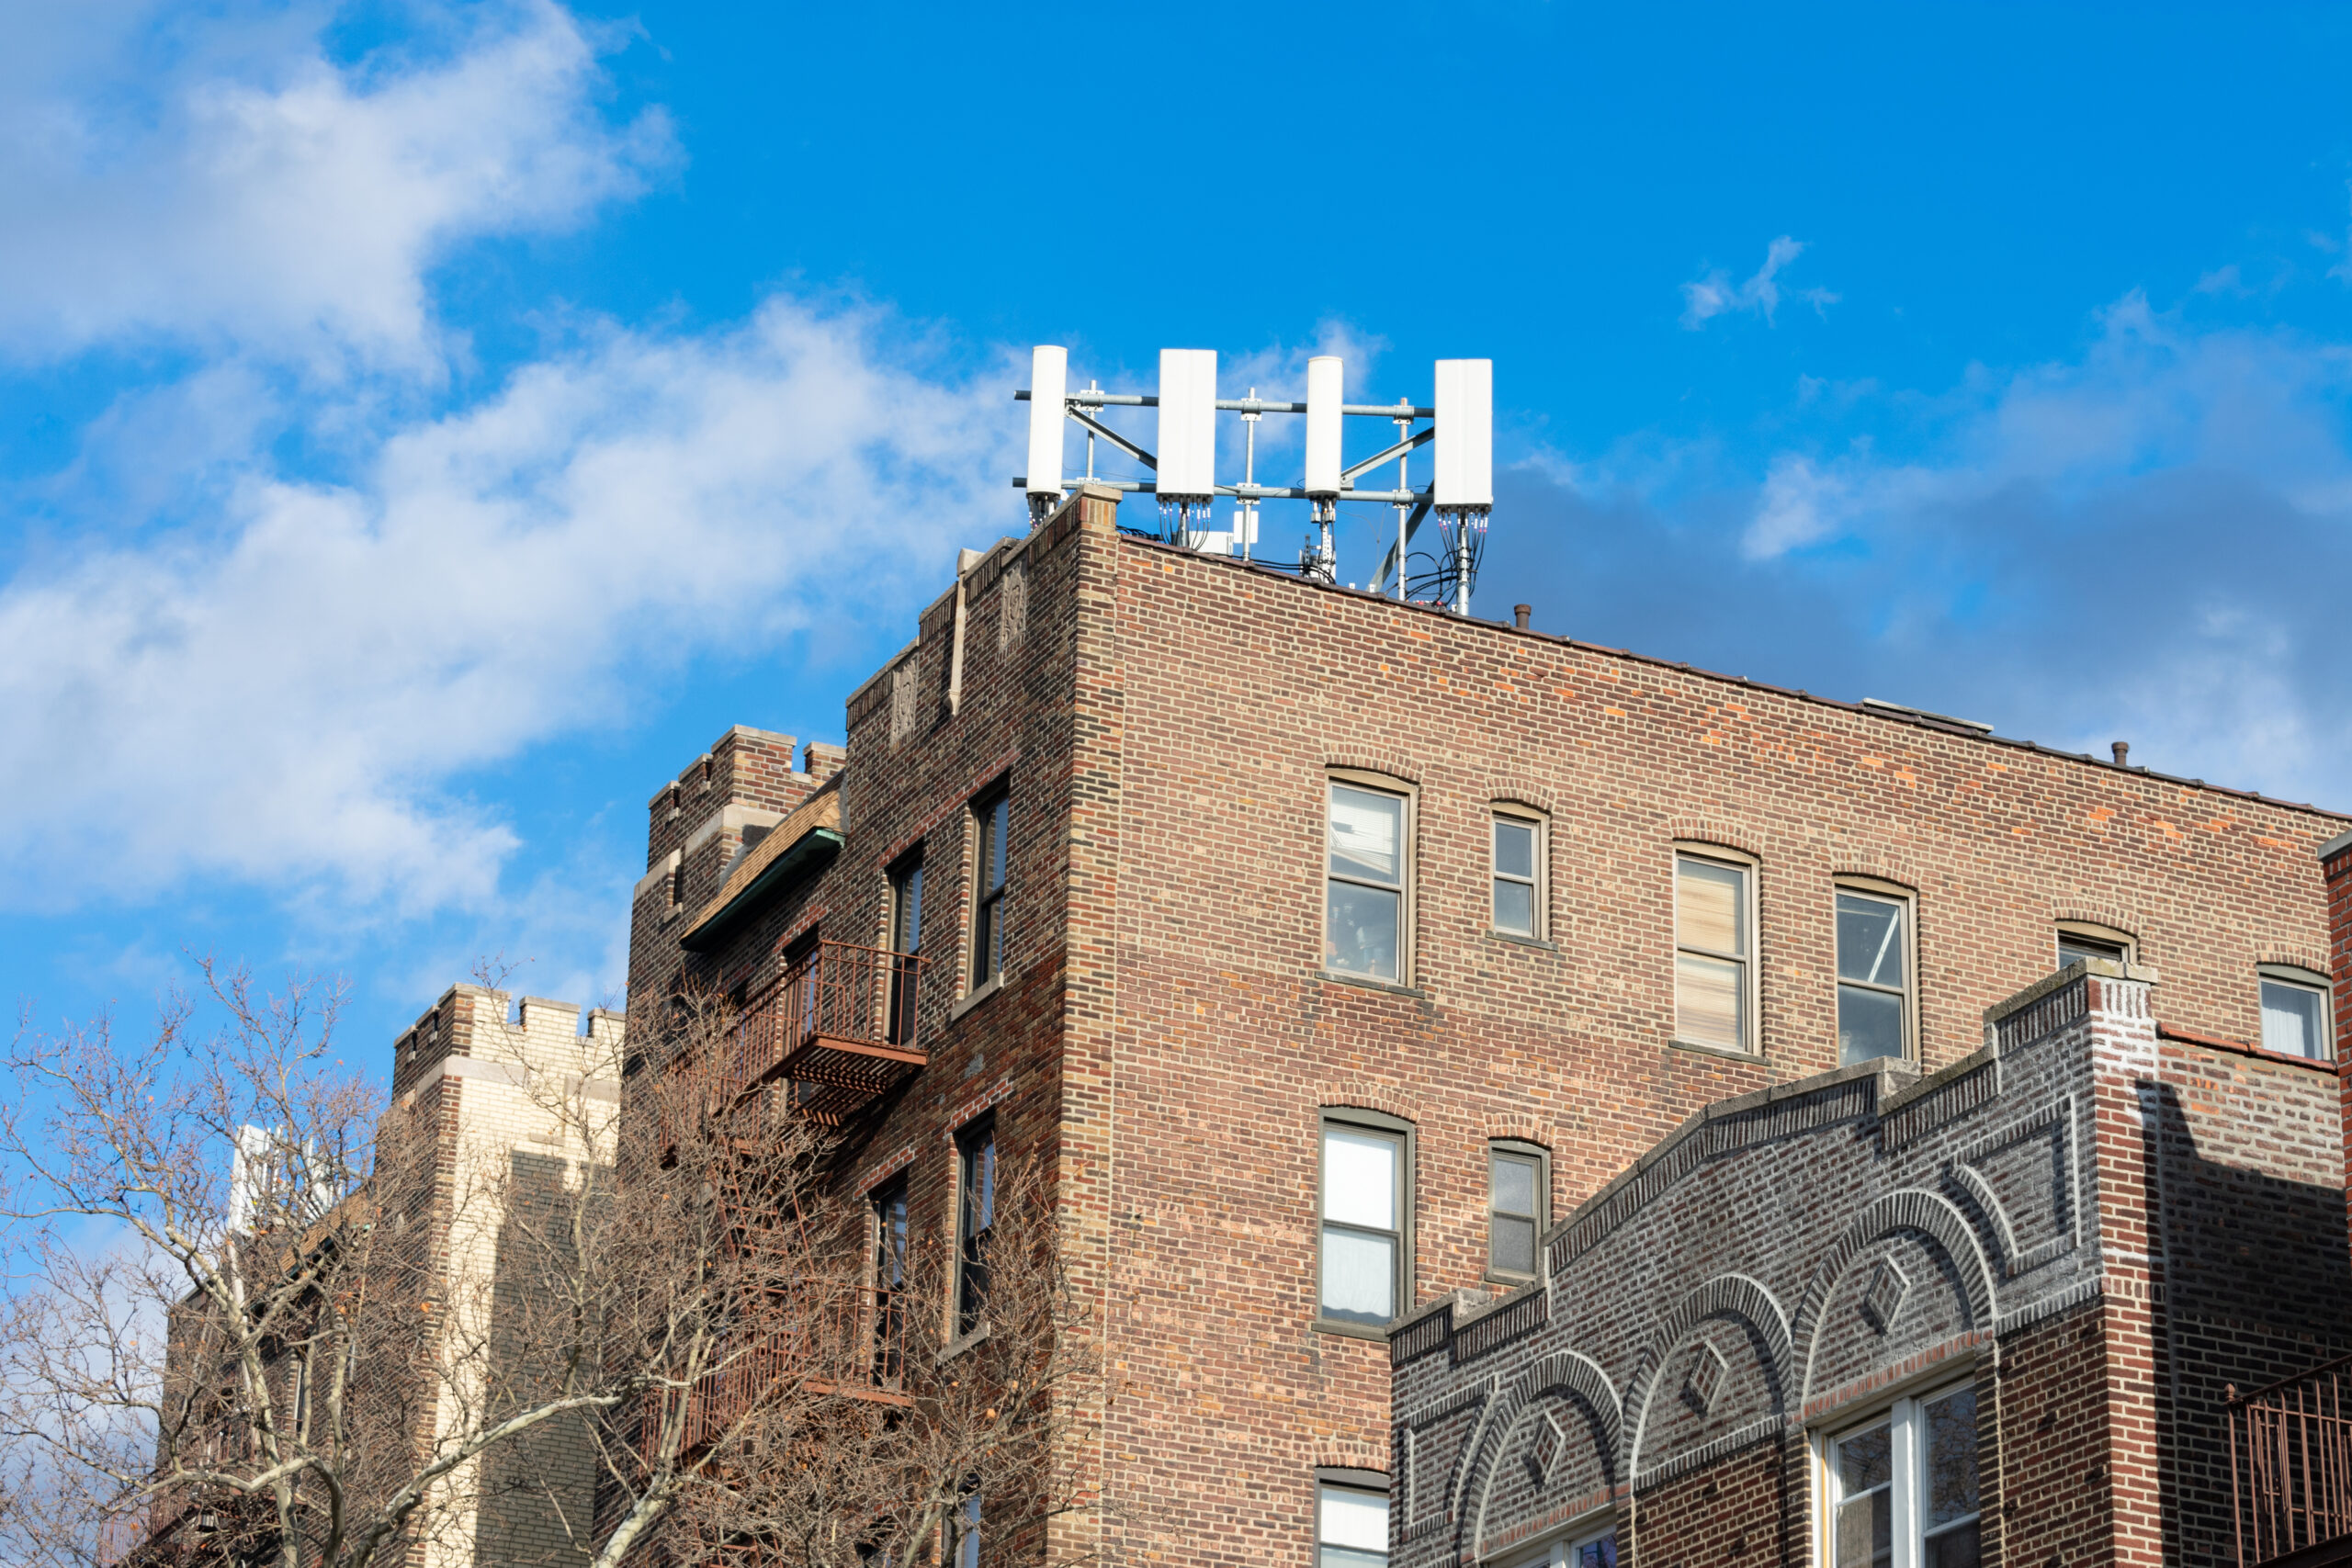 A modern cell site on the roof of an old brick residential building in New York City